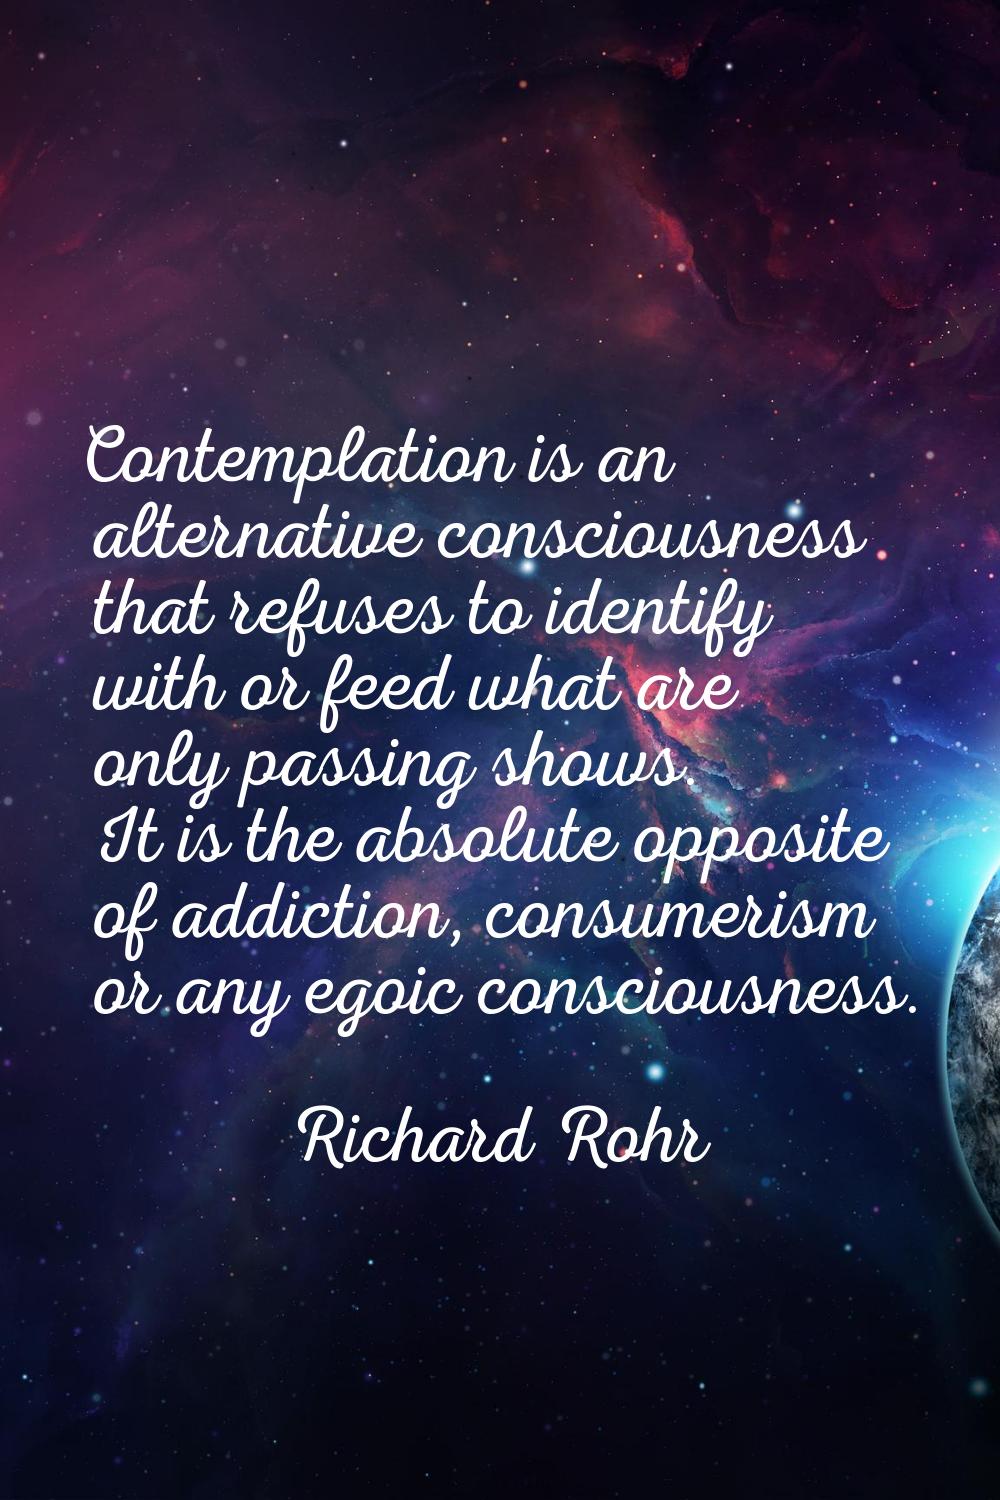 Contemplation is an alternative consciousness that refuses to identify with or feed what are only p